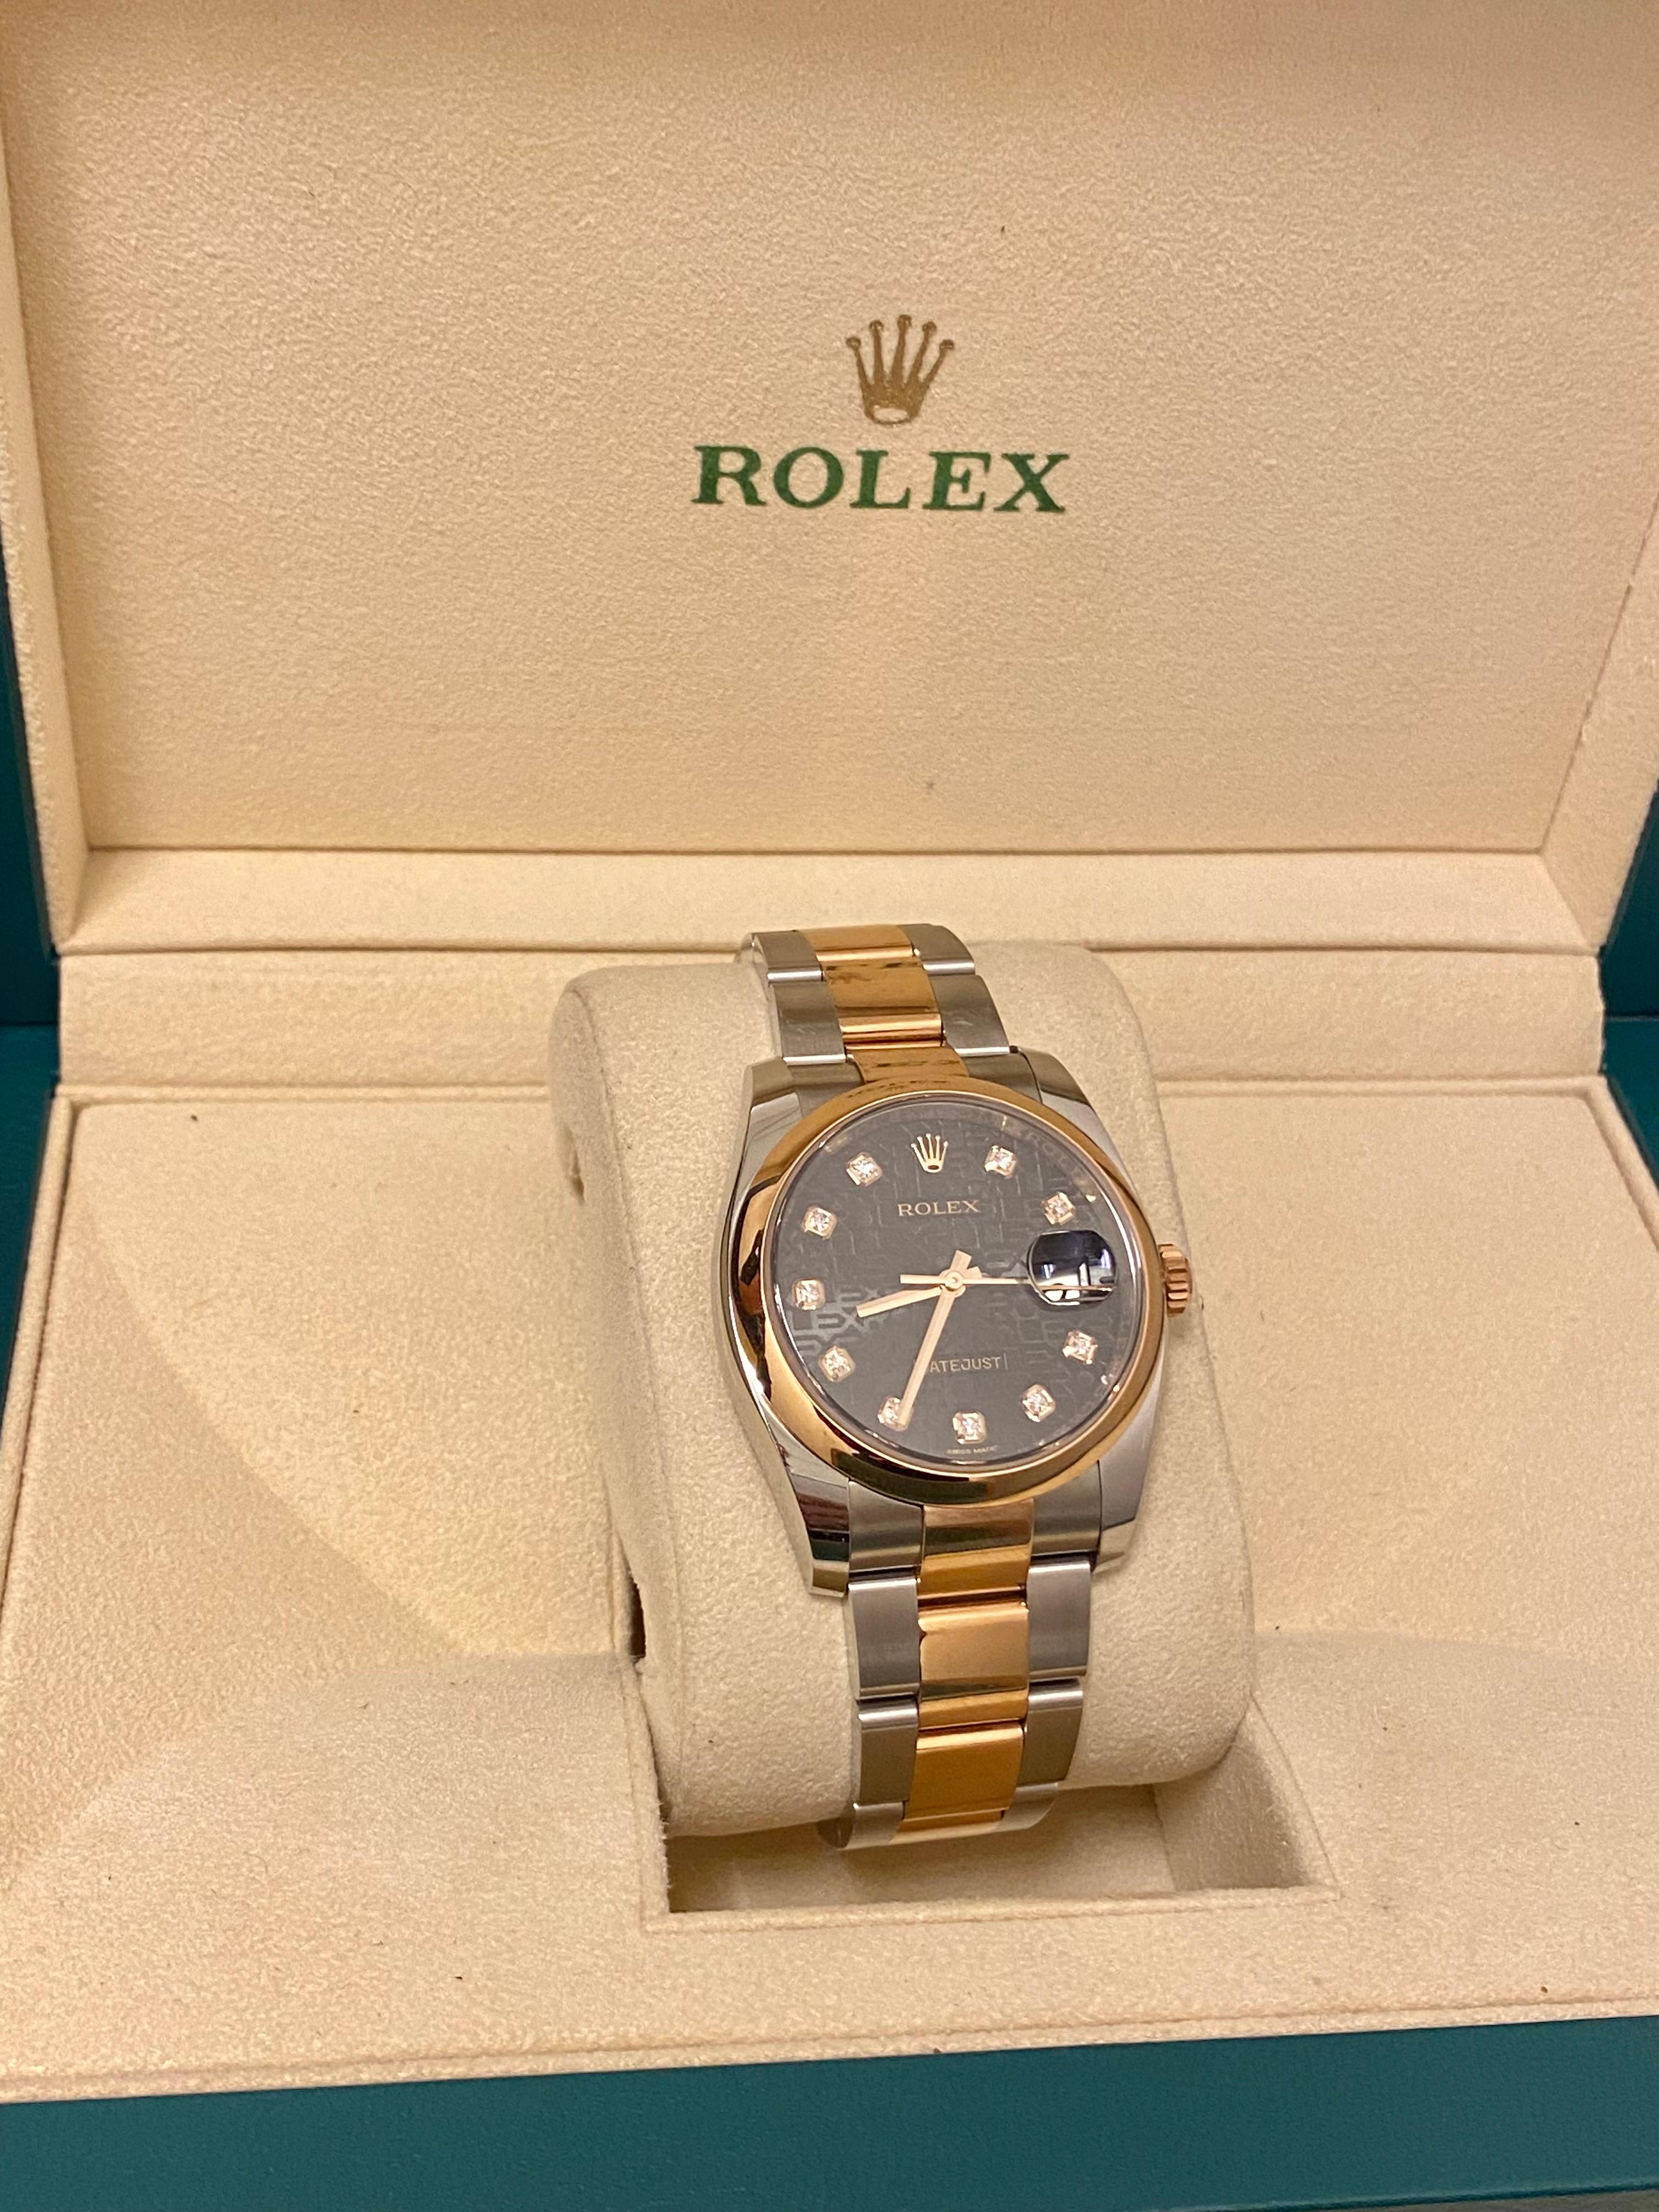 Rolex Datejust wristwatch with smooth bezel and two-tone oyster band/dial. This Rolex's significance lies in the dial. A smooth Everrose gold bezel sets the stage for a subtle, yet glossy 